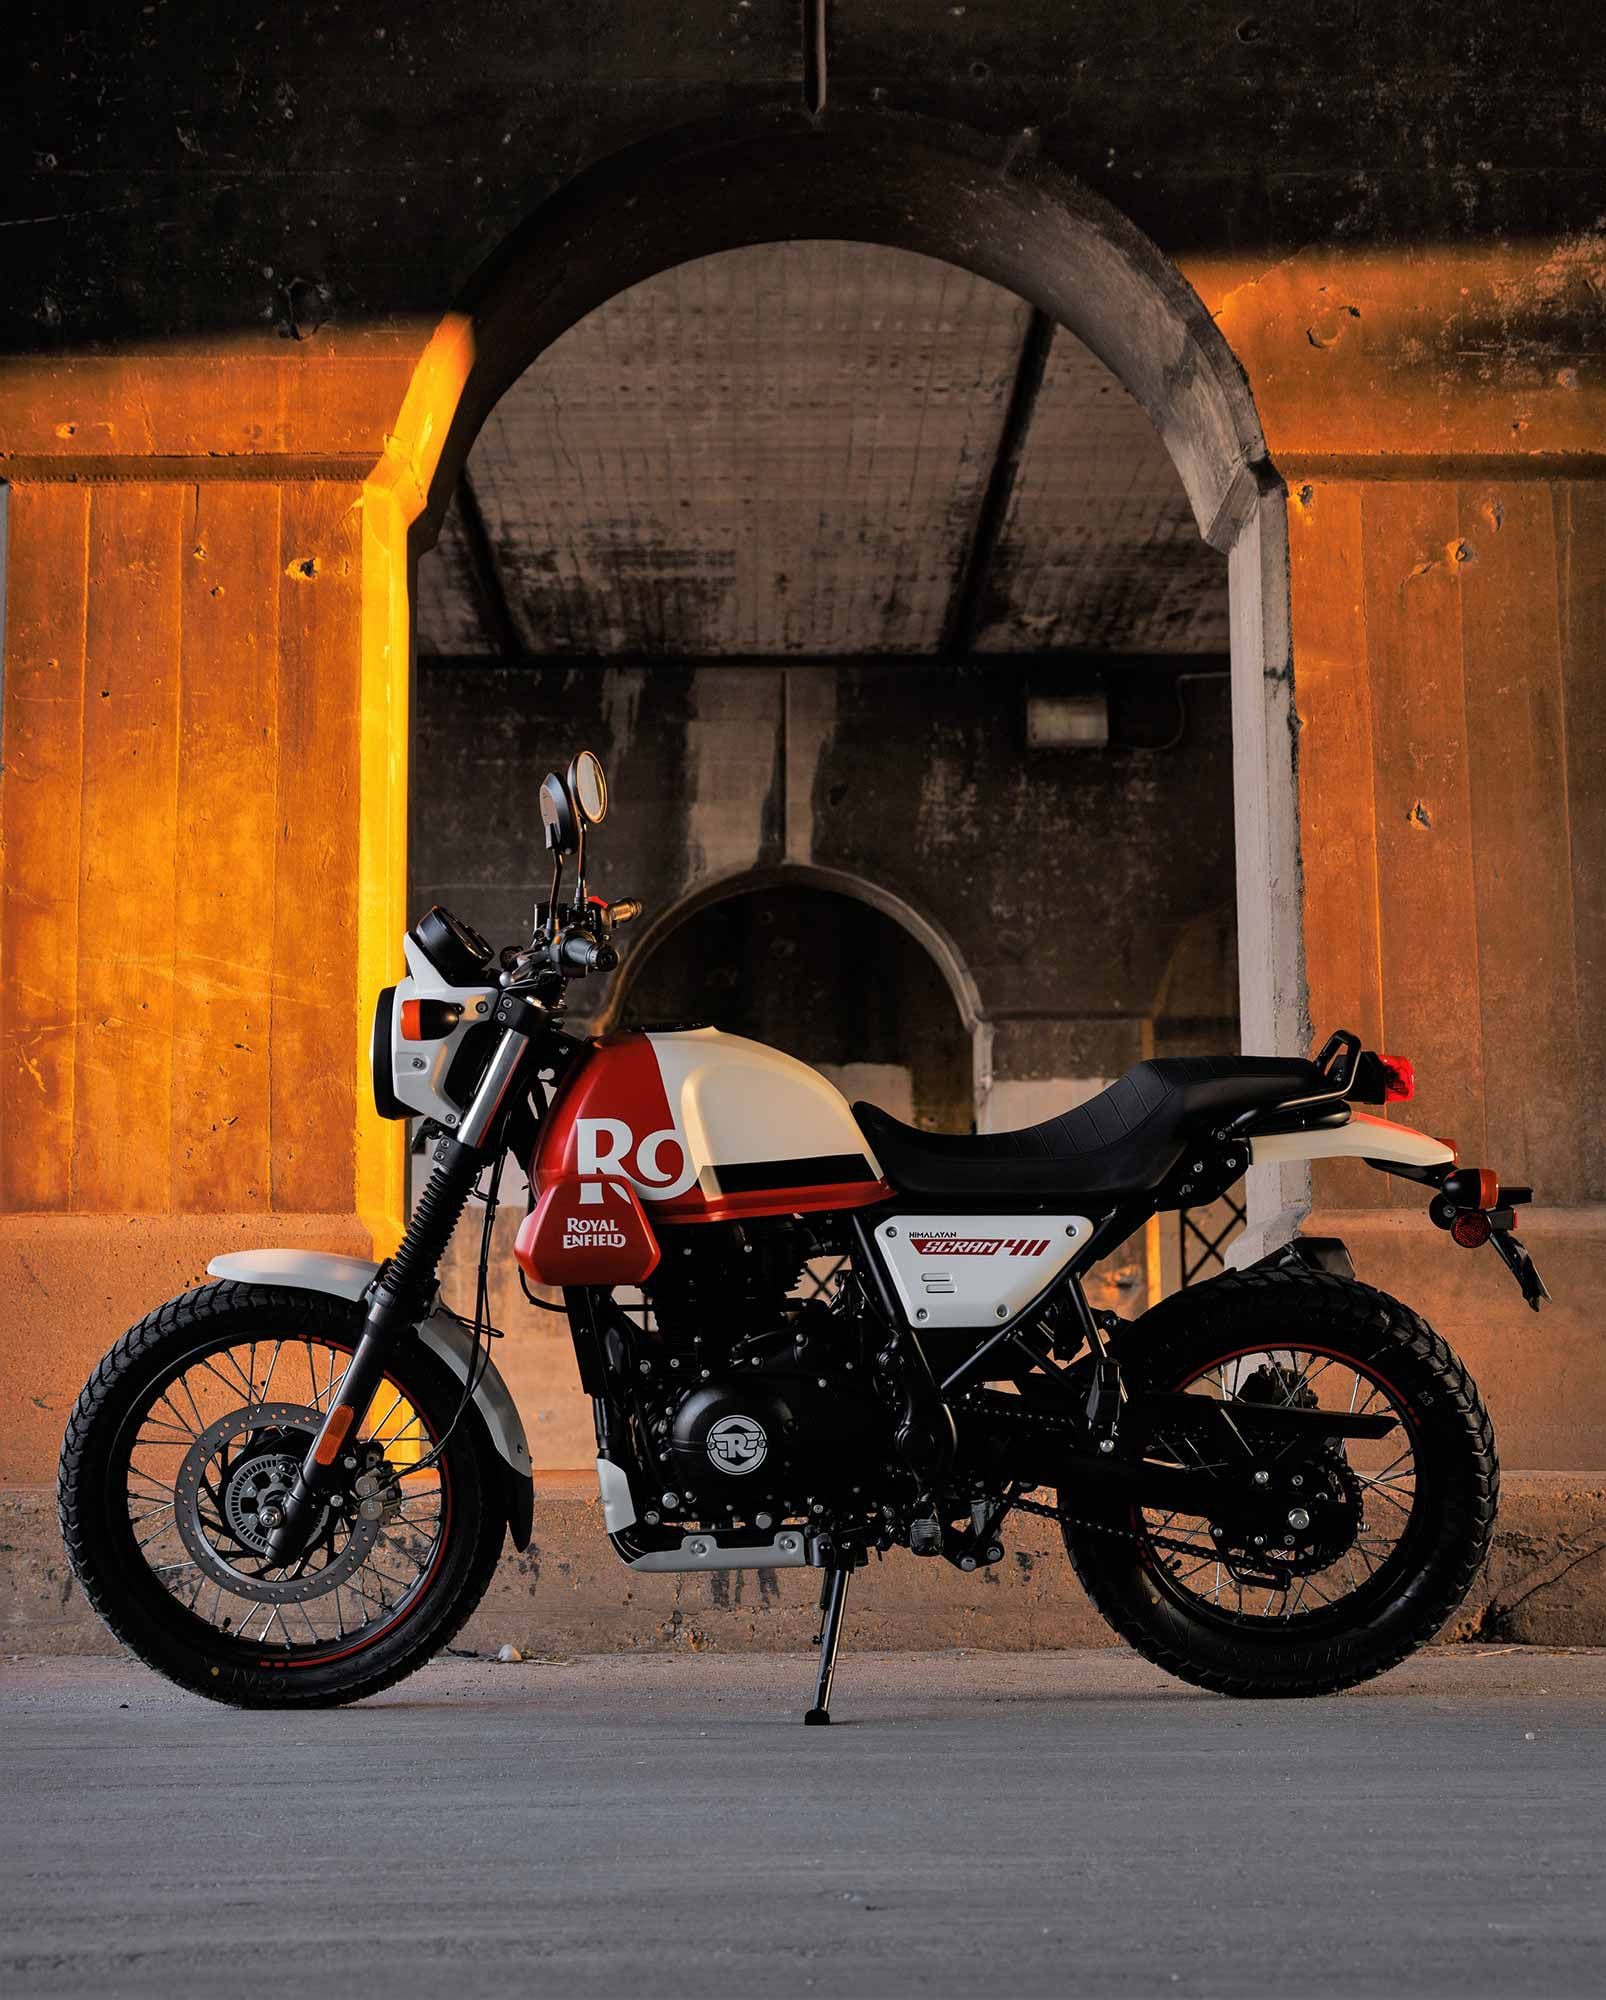 A single-piece scrambler seat also differentiates the Scram, along with a new headlight cowling and redesigned side panels. Handlebars are also positioned lower and a bit farther back.